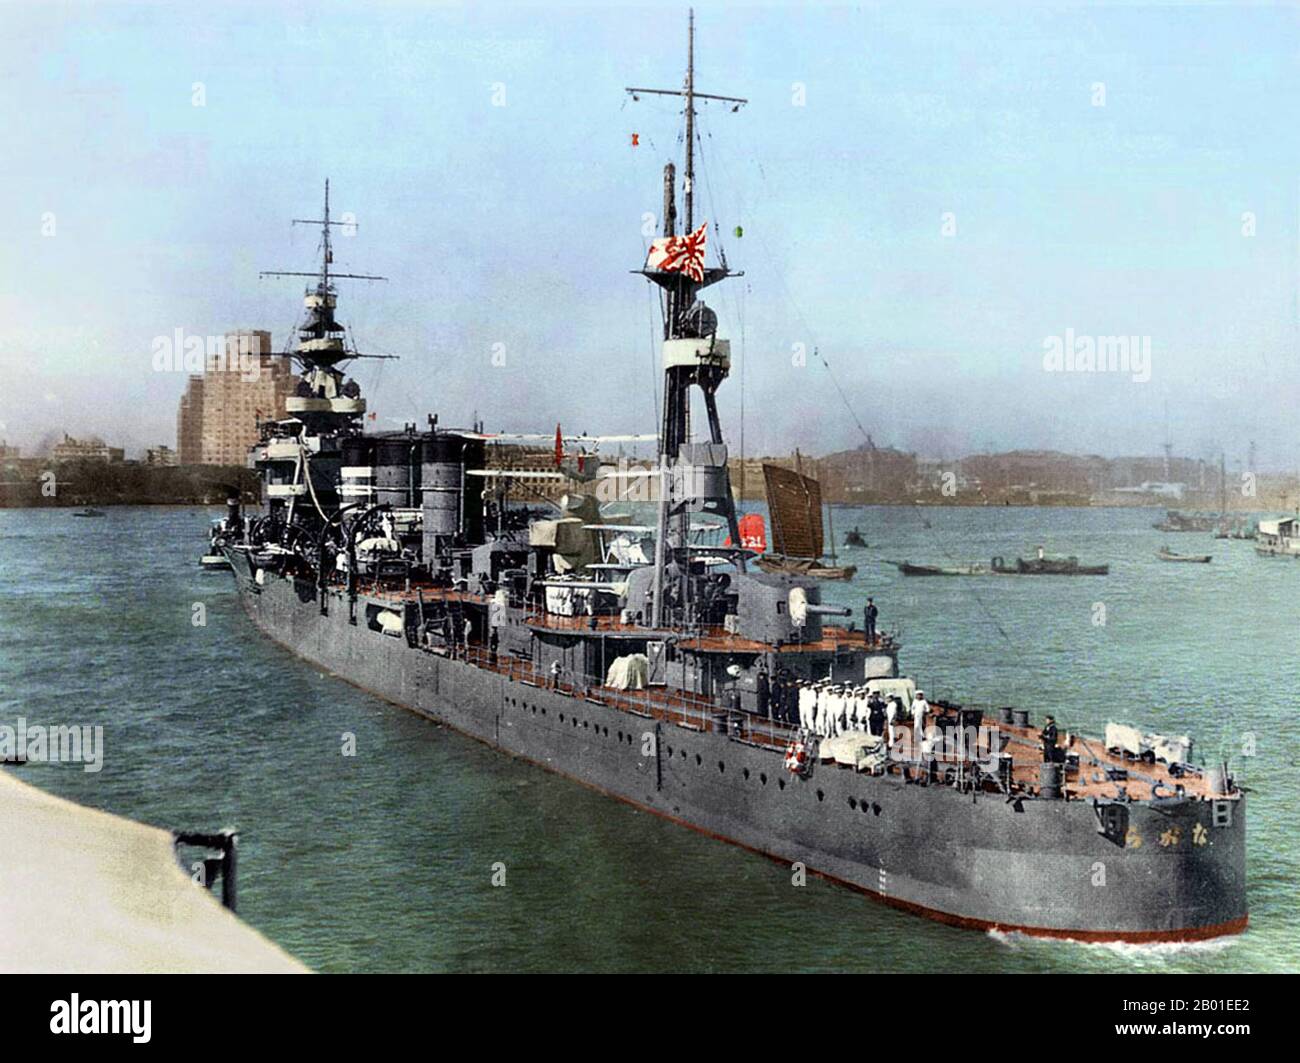 China: The Japanese cruiser Nagara on the Huangpu River, Shanghai. Broadway Mansions visible on the horizon, September 27, 1936  Nagara (長良 軽巡洋艦 Nagara keijun'yōkan) was the lead ship of her class of light cruiser in the Imperial Japanese Navy. She was named after the Nagara River in the Chūbu region of Japan.  The Nagara was the first vessel completed in the Nagara-class, and like other vessels of her class, she was intended for use as the flagship of a destroyer flotilla, and it was in that role that she participated in the invasions of the Philippines and the Netherlands East Indies. Stock Photo